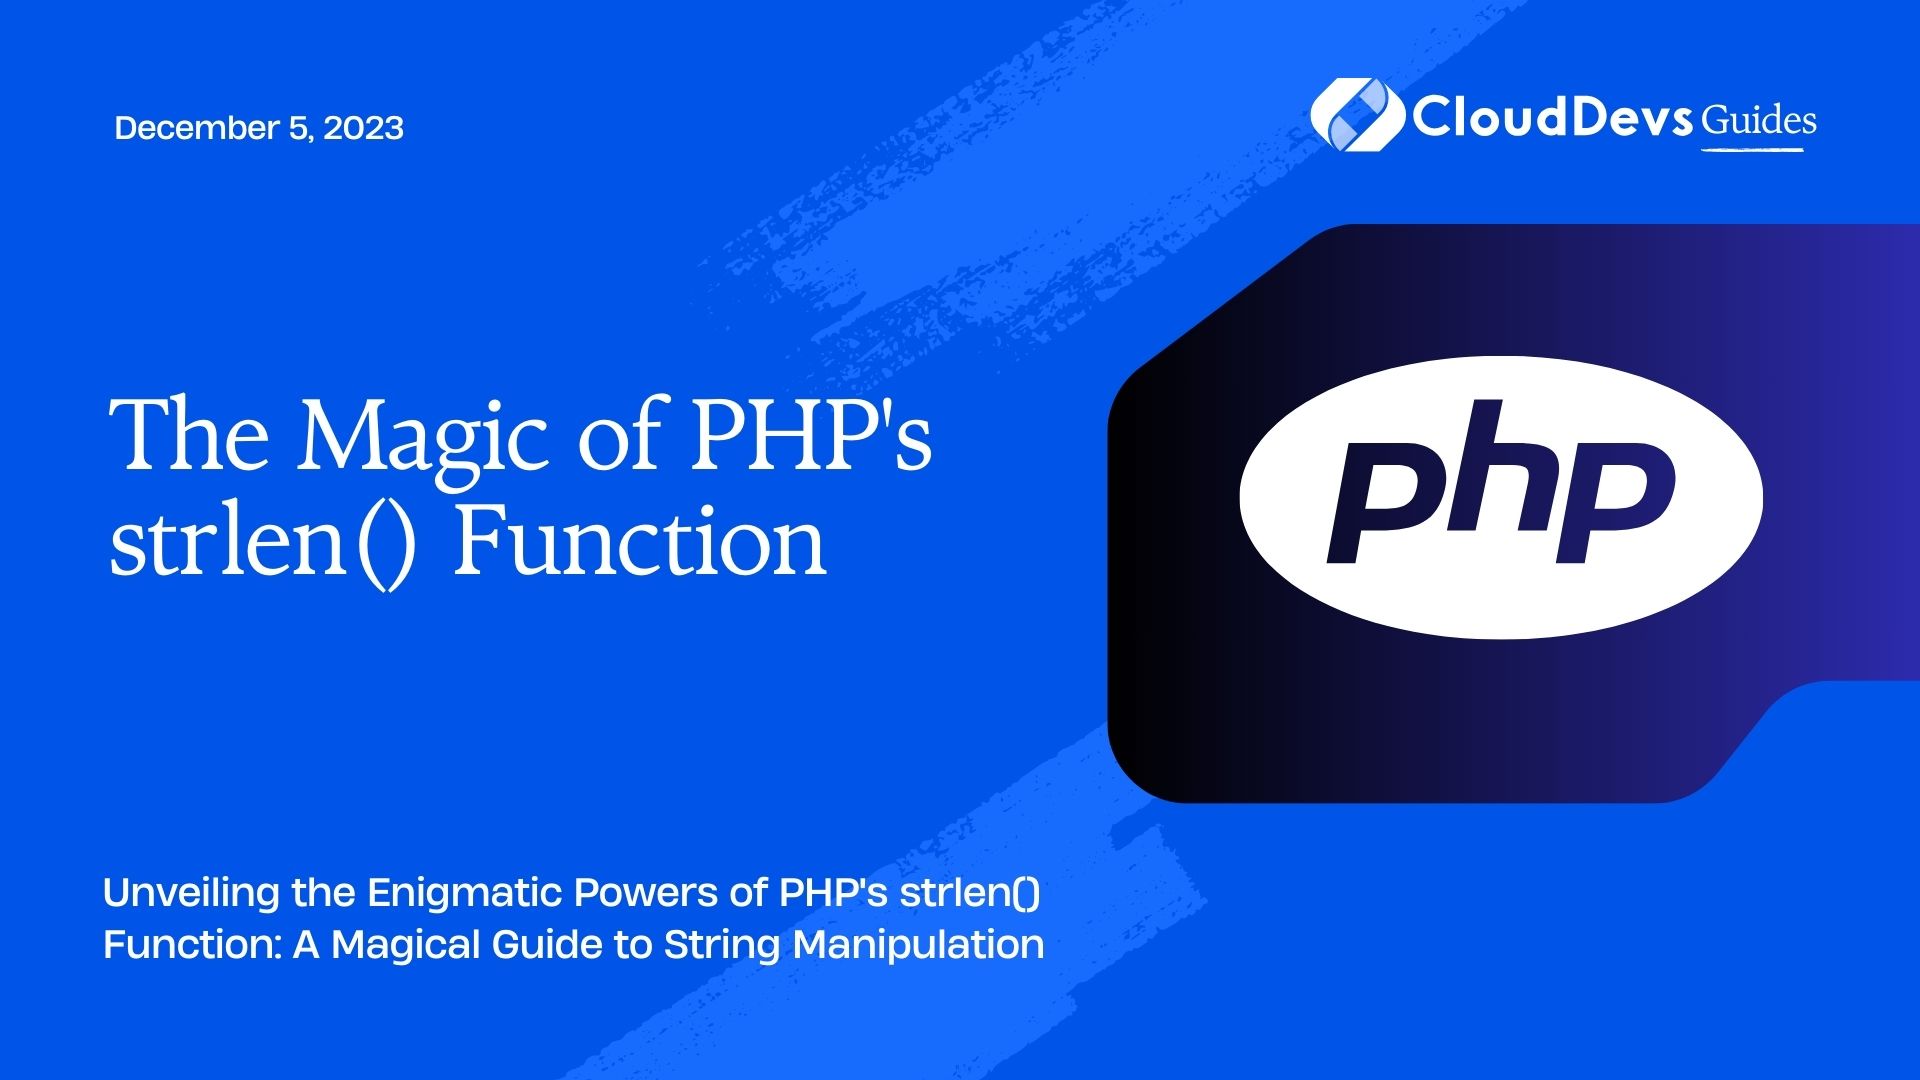 The Magic of PHP's strlen() Function